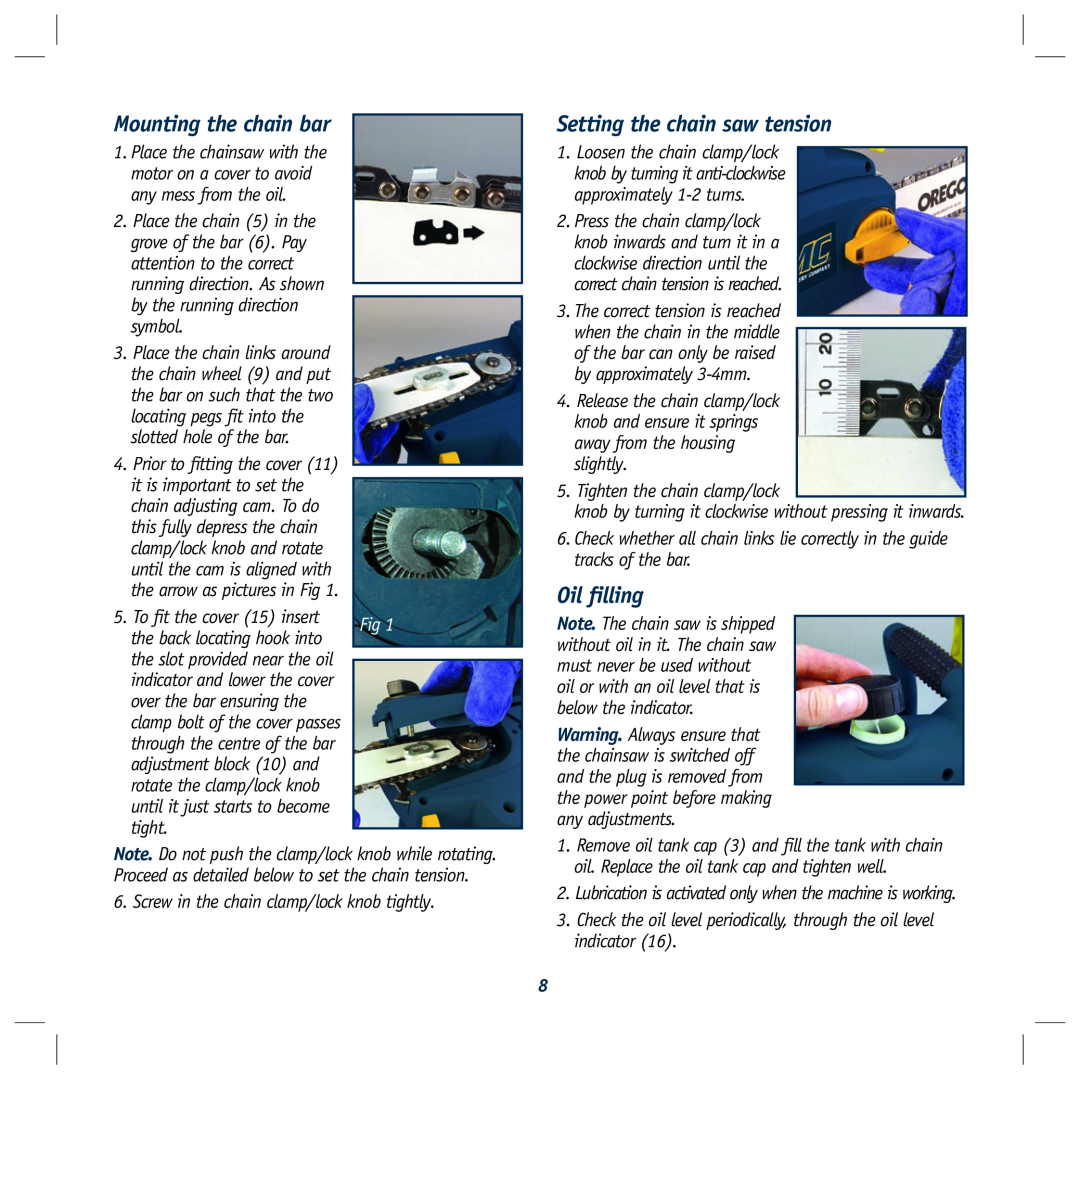 Global Machinery Company ELC2000 instruction manual Setting the chain saw tension, Oil filling, Mounting the chain bar 